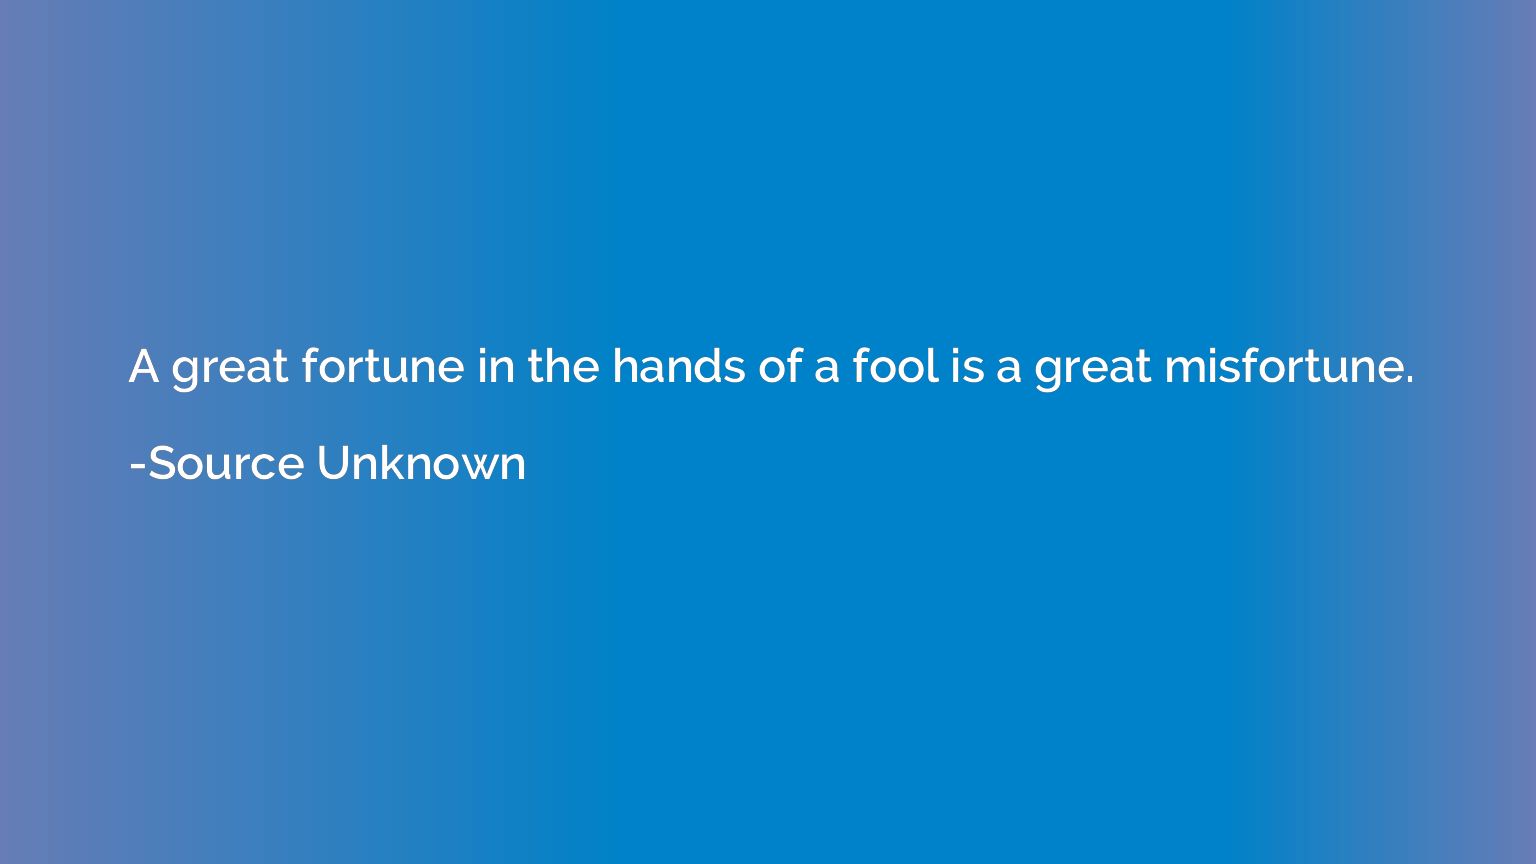 A great fortune in the hands of a fool is a great misfortune